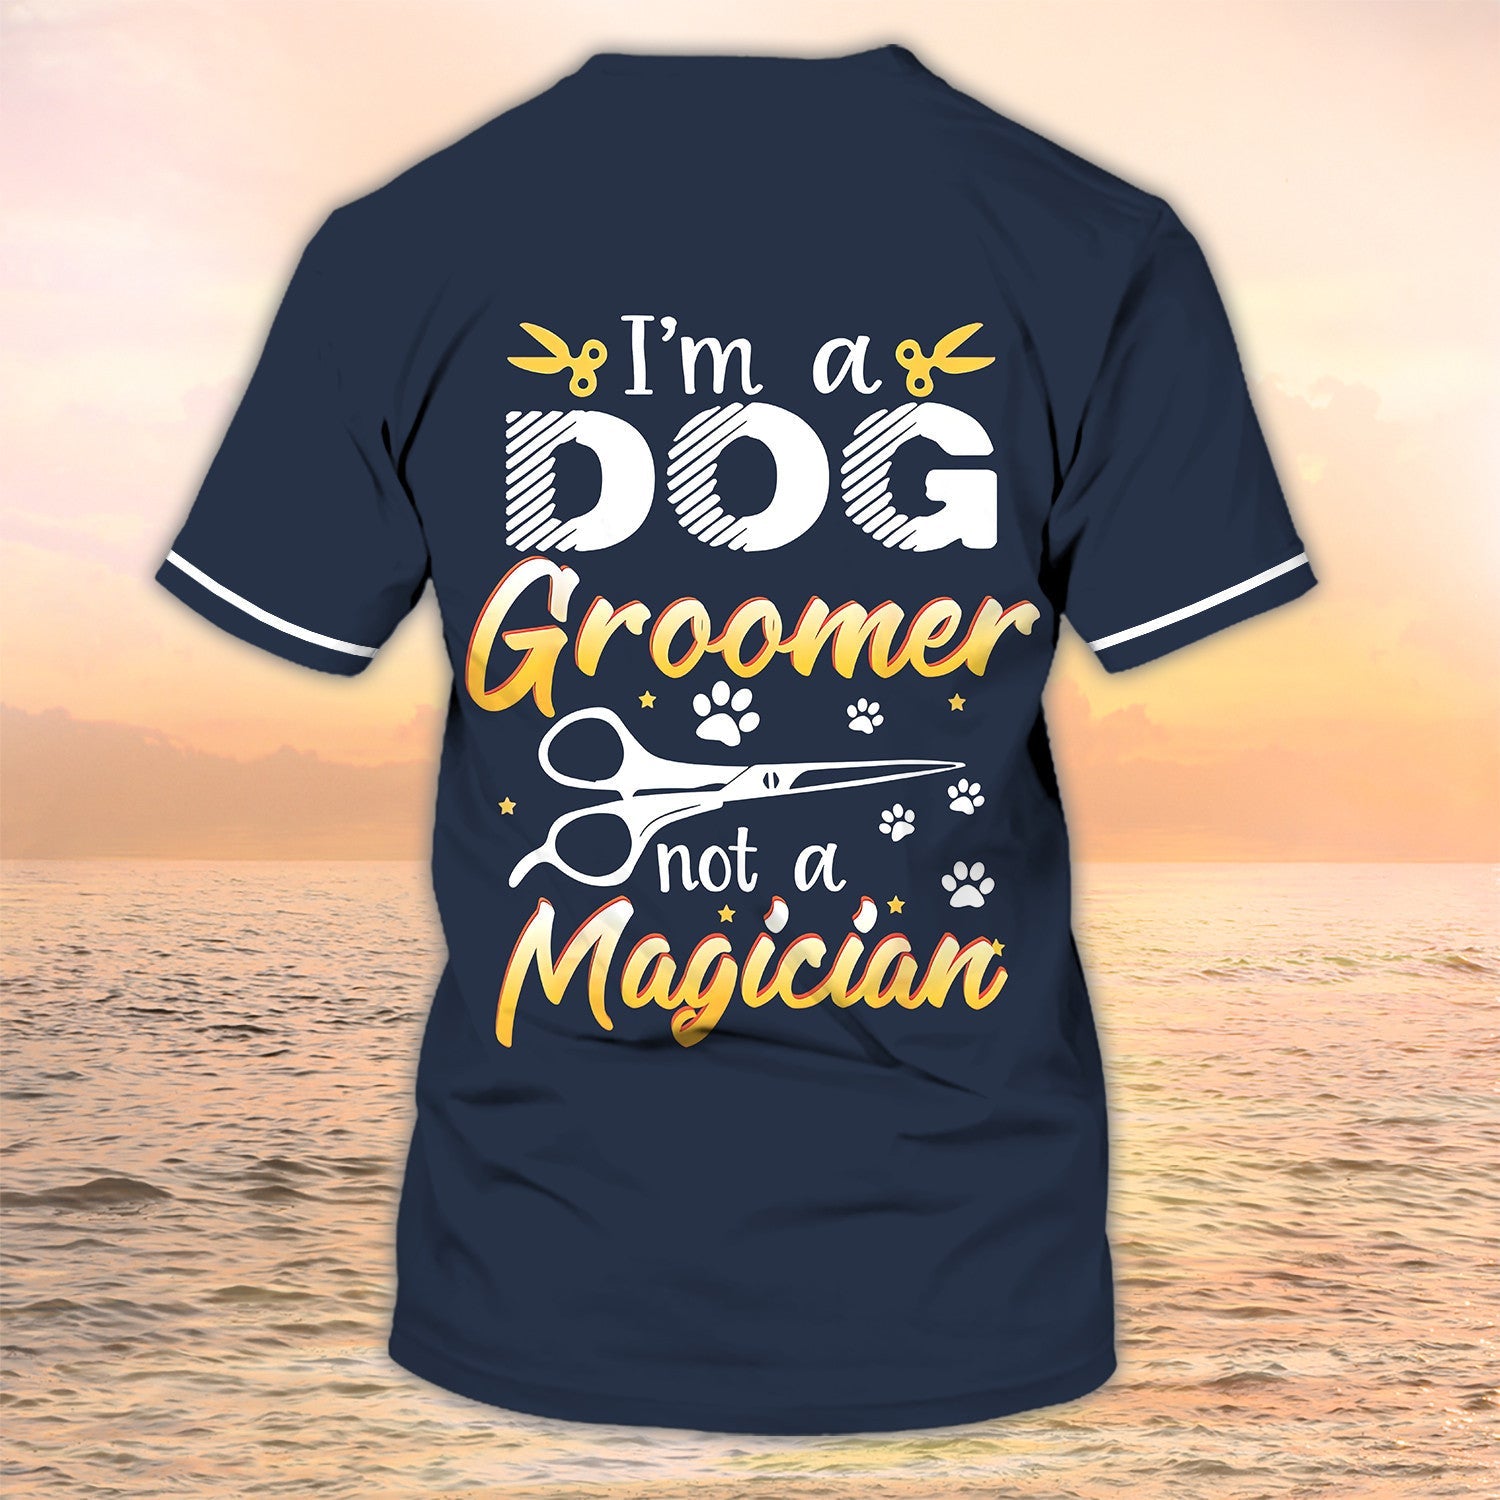 Grooming Apparel Am Dog Groomer Personalized Name 3D Tshirt Pet Grooming Salon Uniform